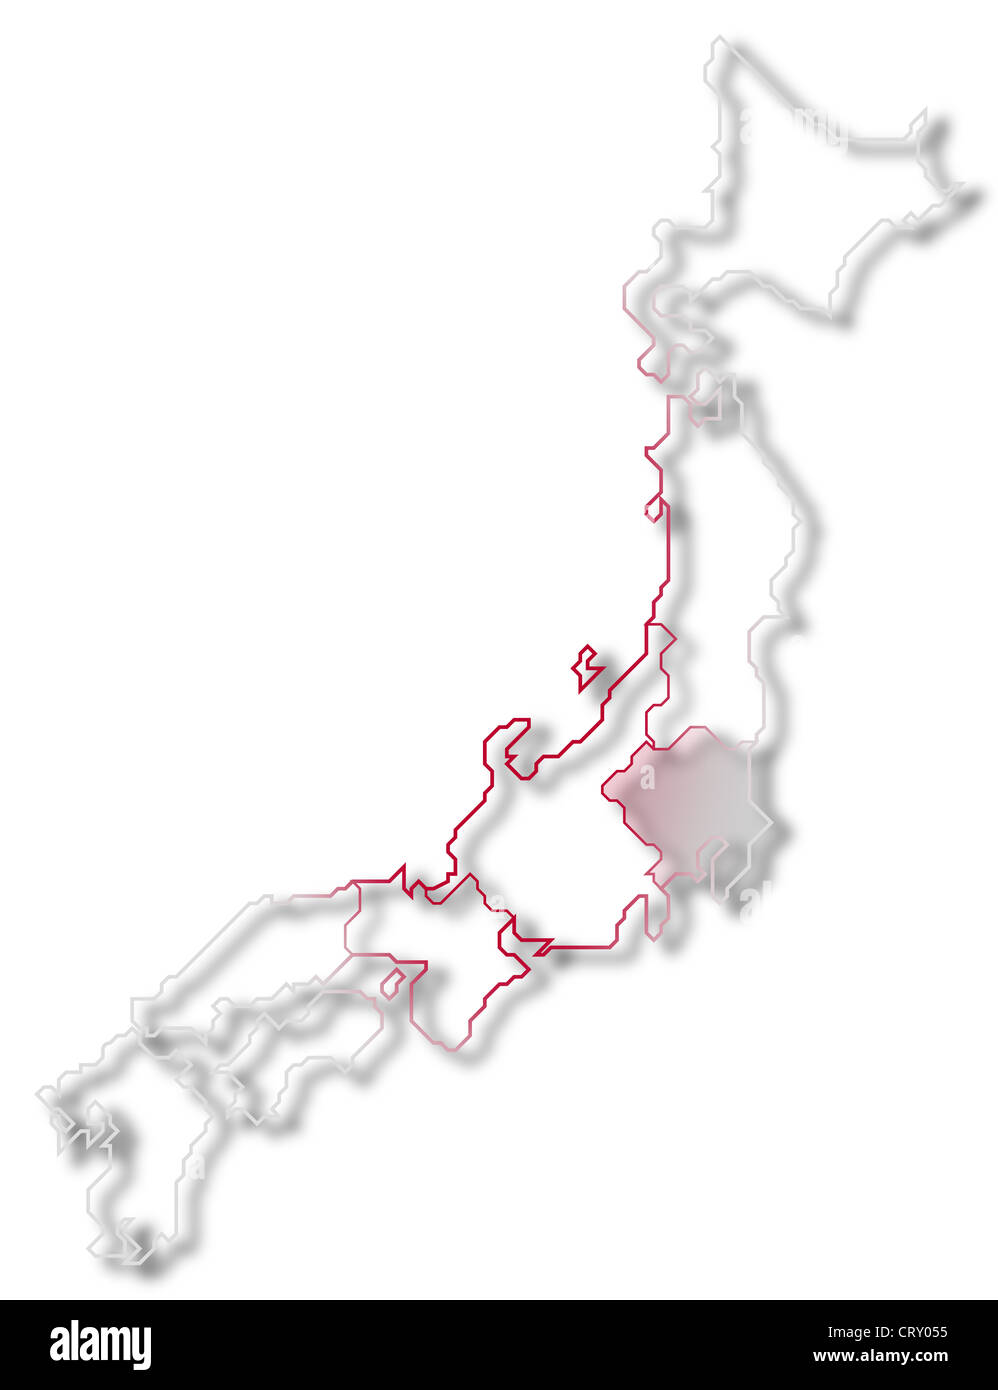 Political map of Japan with the several regions where Kanto is highlighted. Stock Photo